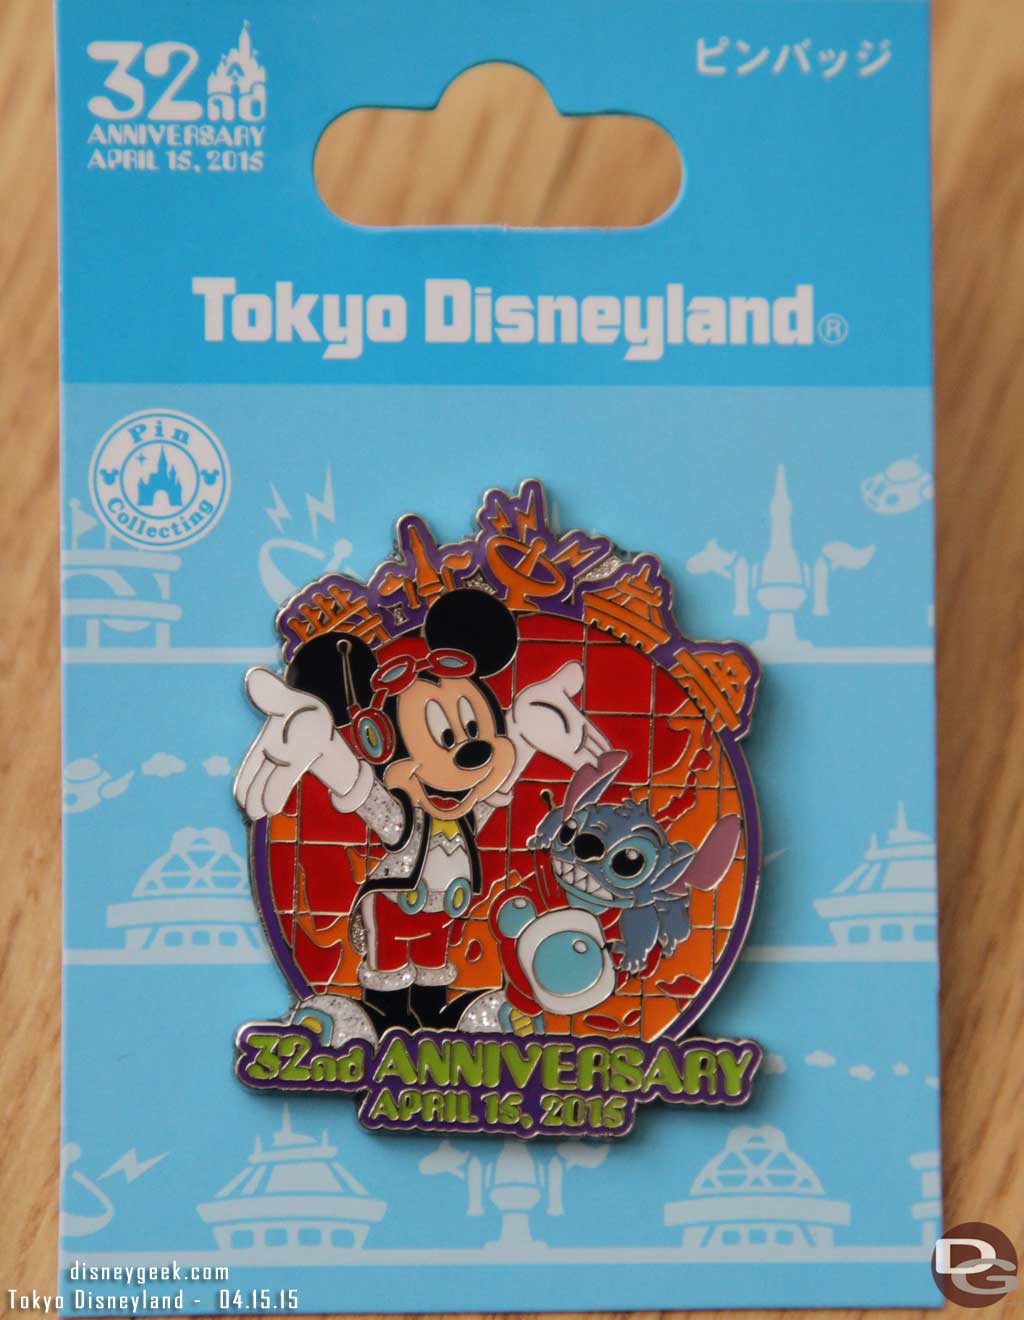 One of my two purchases a 32nd anniversary pin